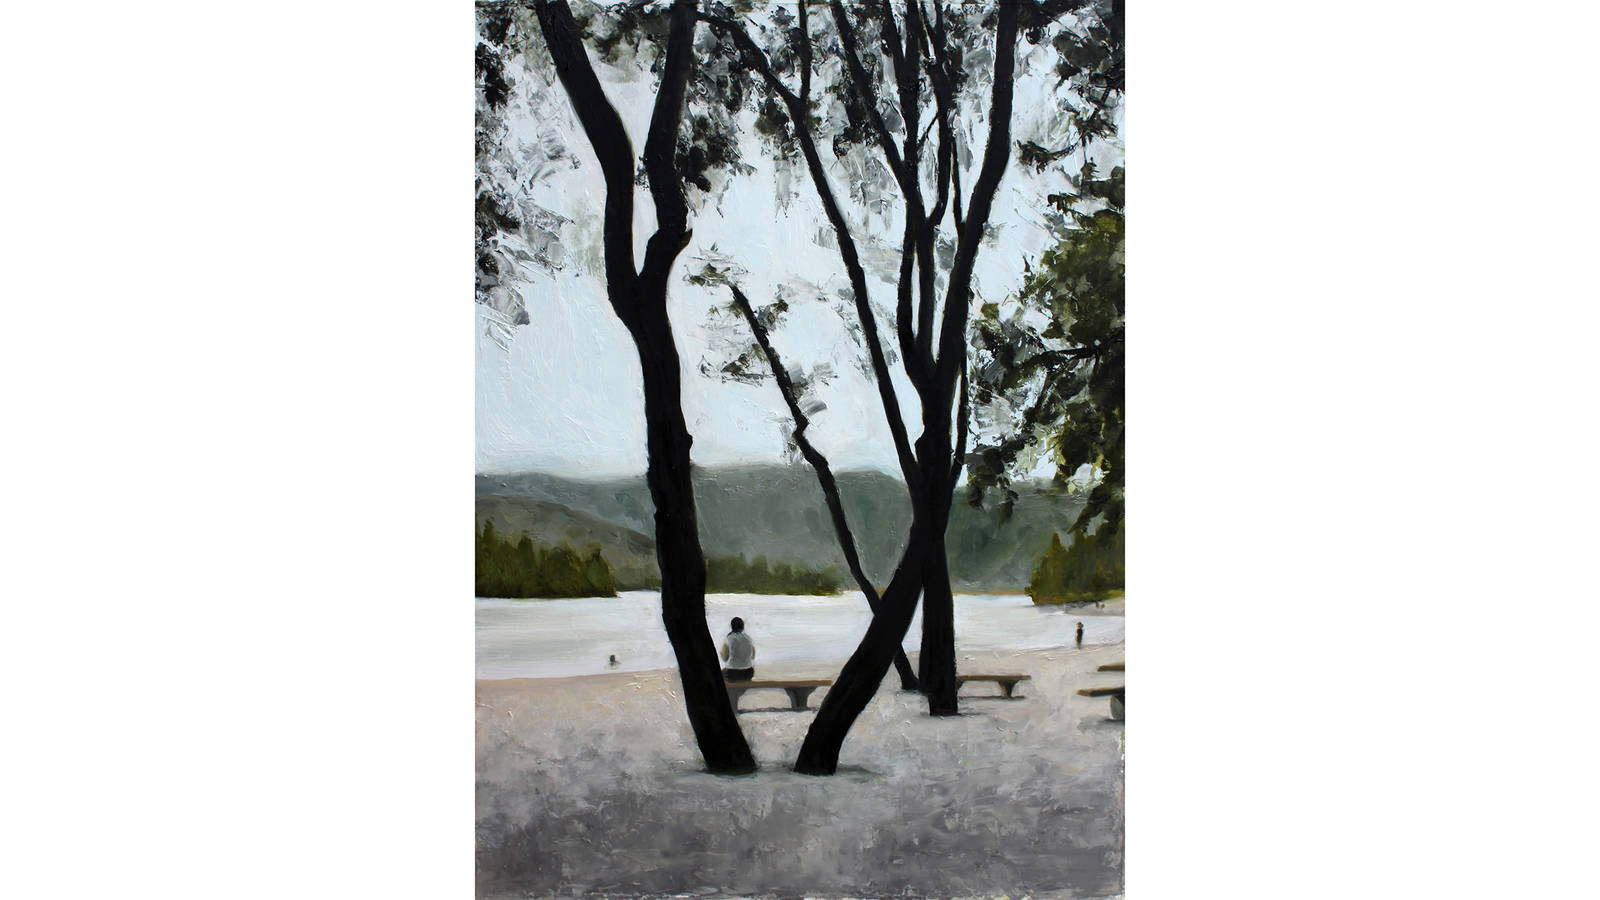 <h3 style="text-align: center; padding: 50px;"><span class="text-Intro-style">Whiskeytown Lake at Whiskeytown National Recreation Area in California. Oil on paper, 2017.</span></h3>